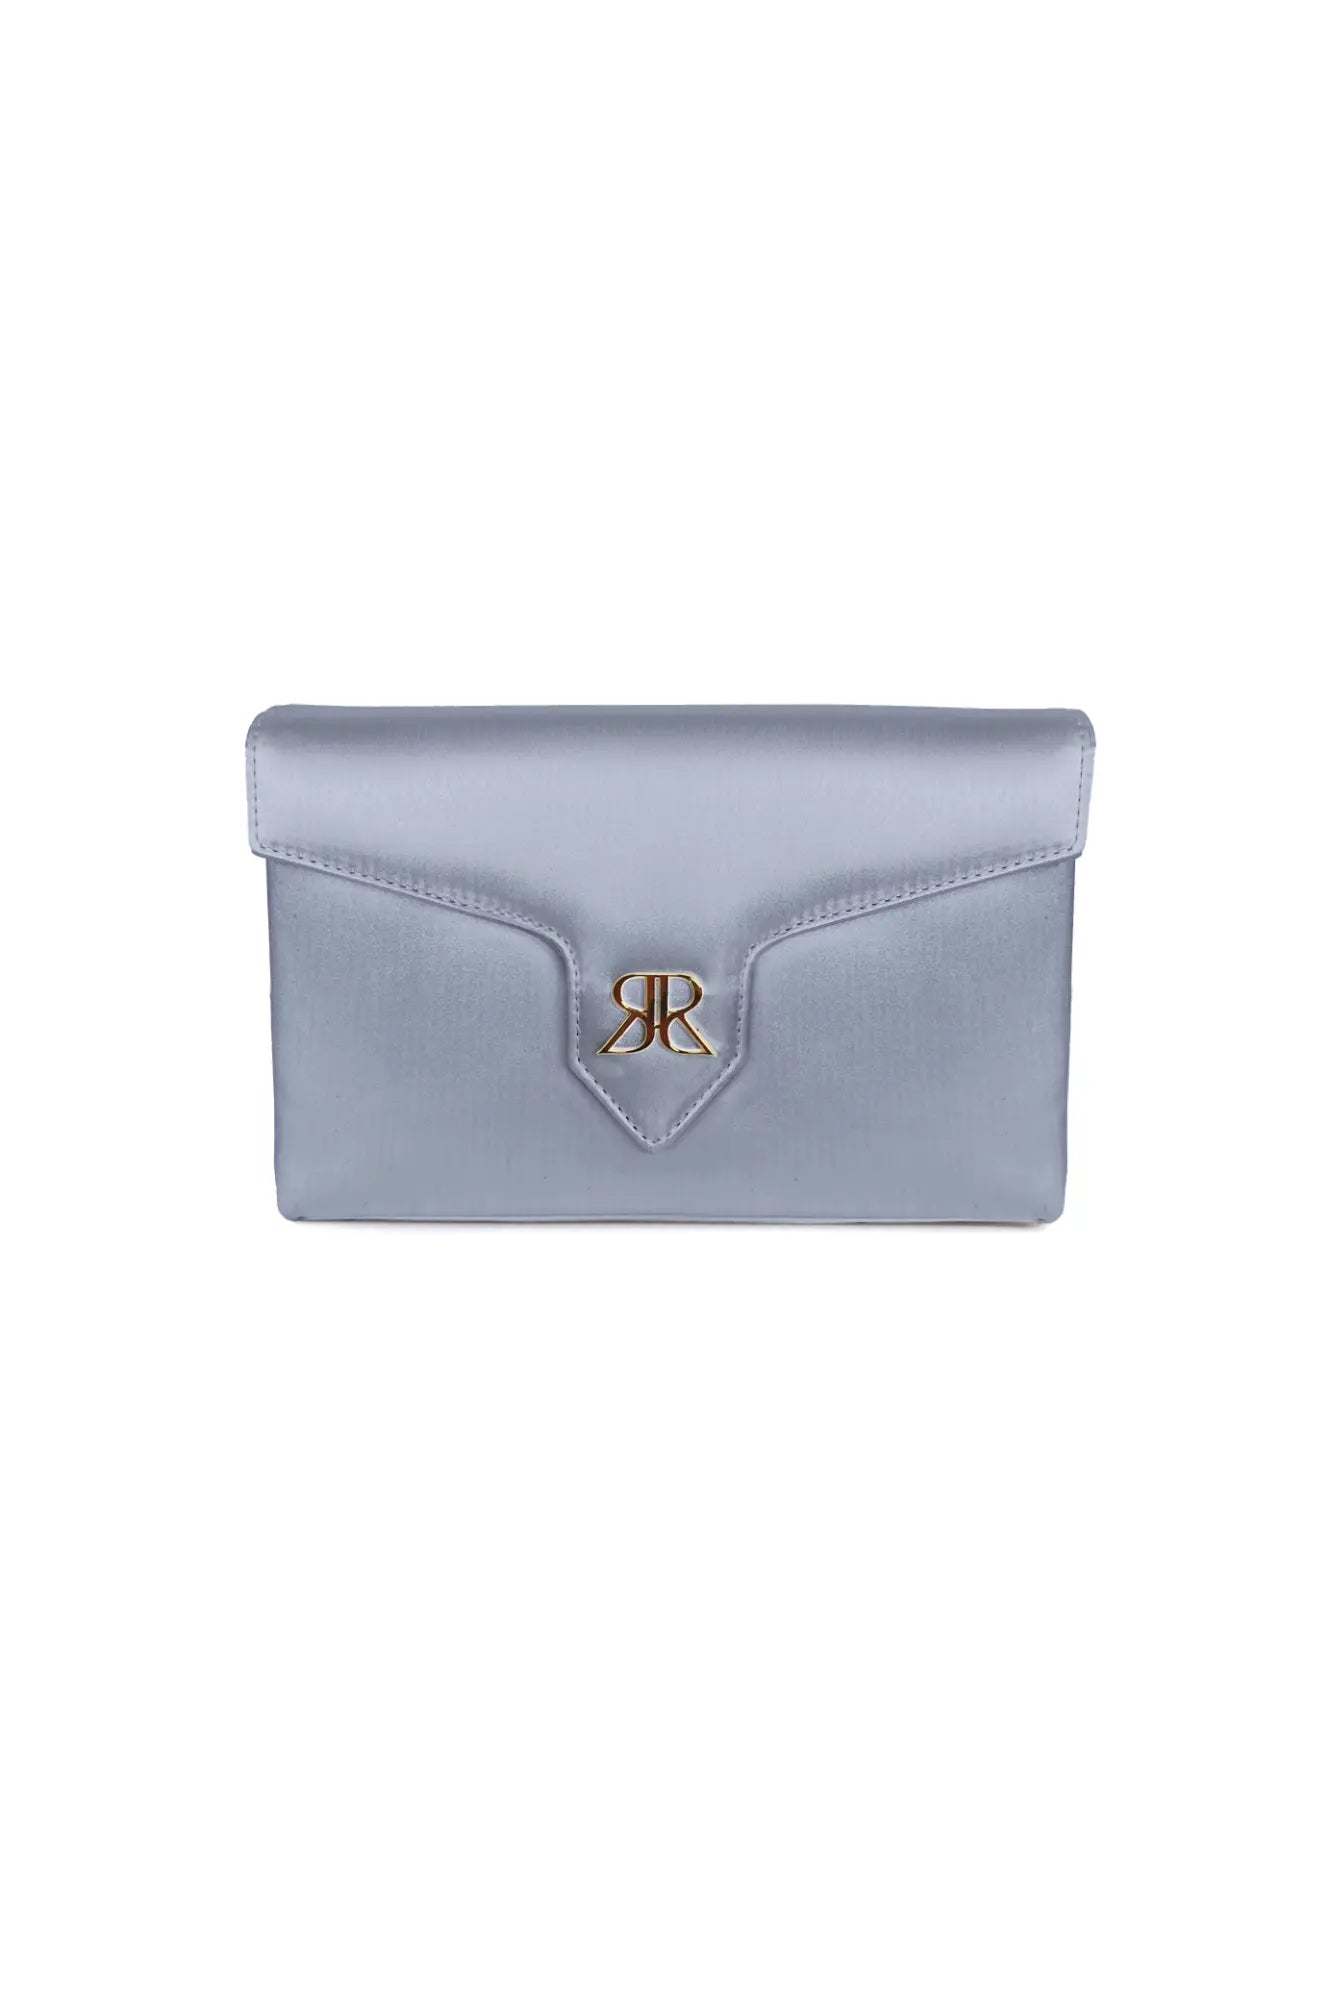 Light blue Love Note Envelope Clutch Steel Blue with a gold-tone logo clasp.